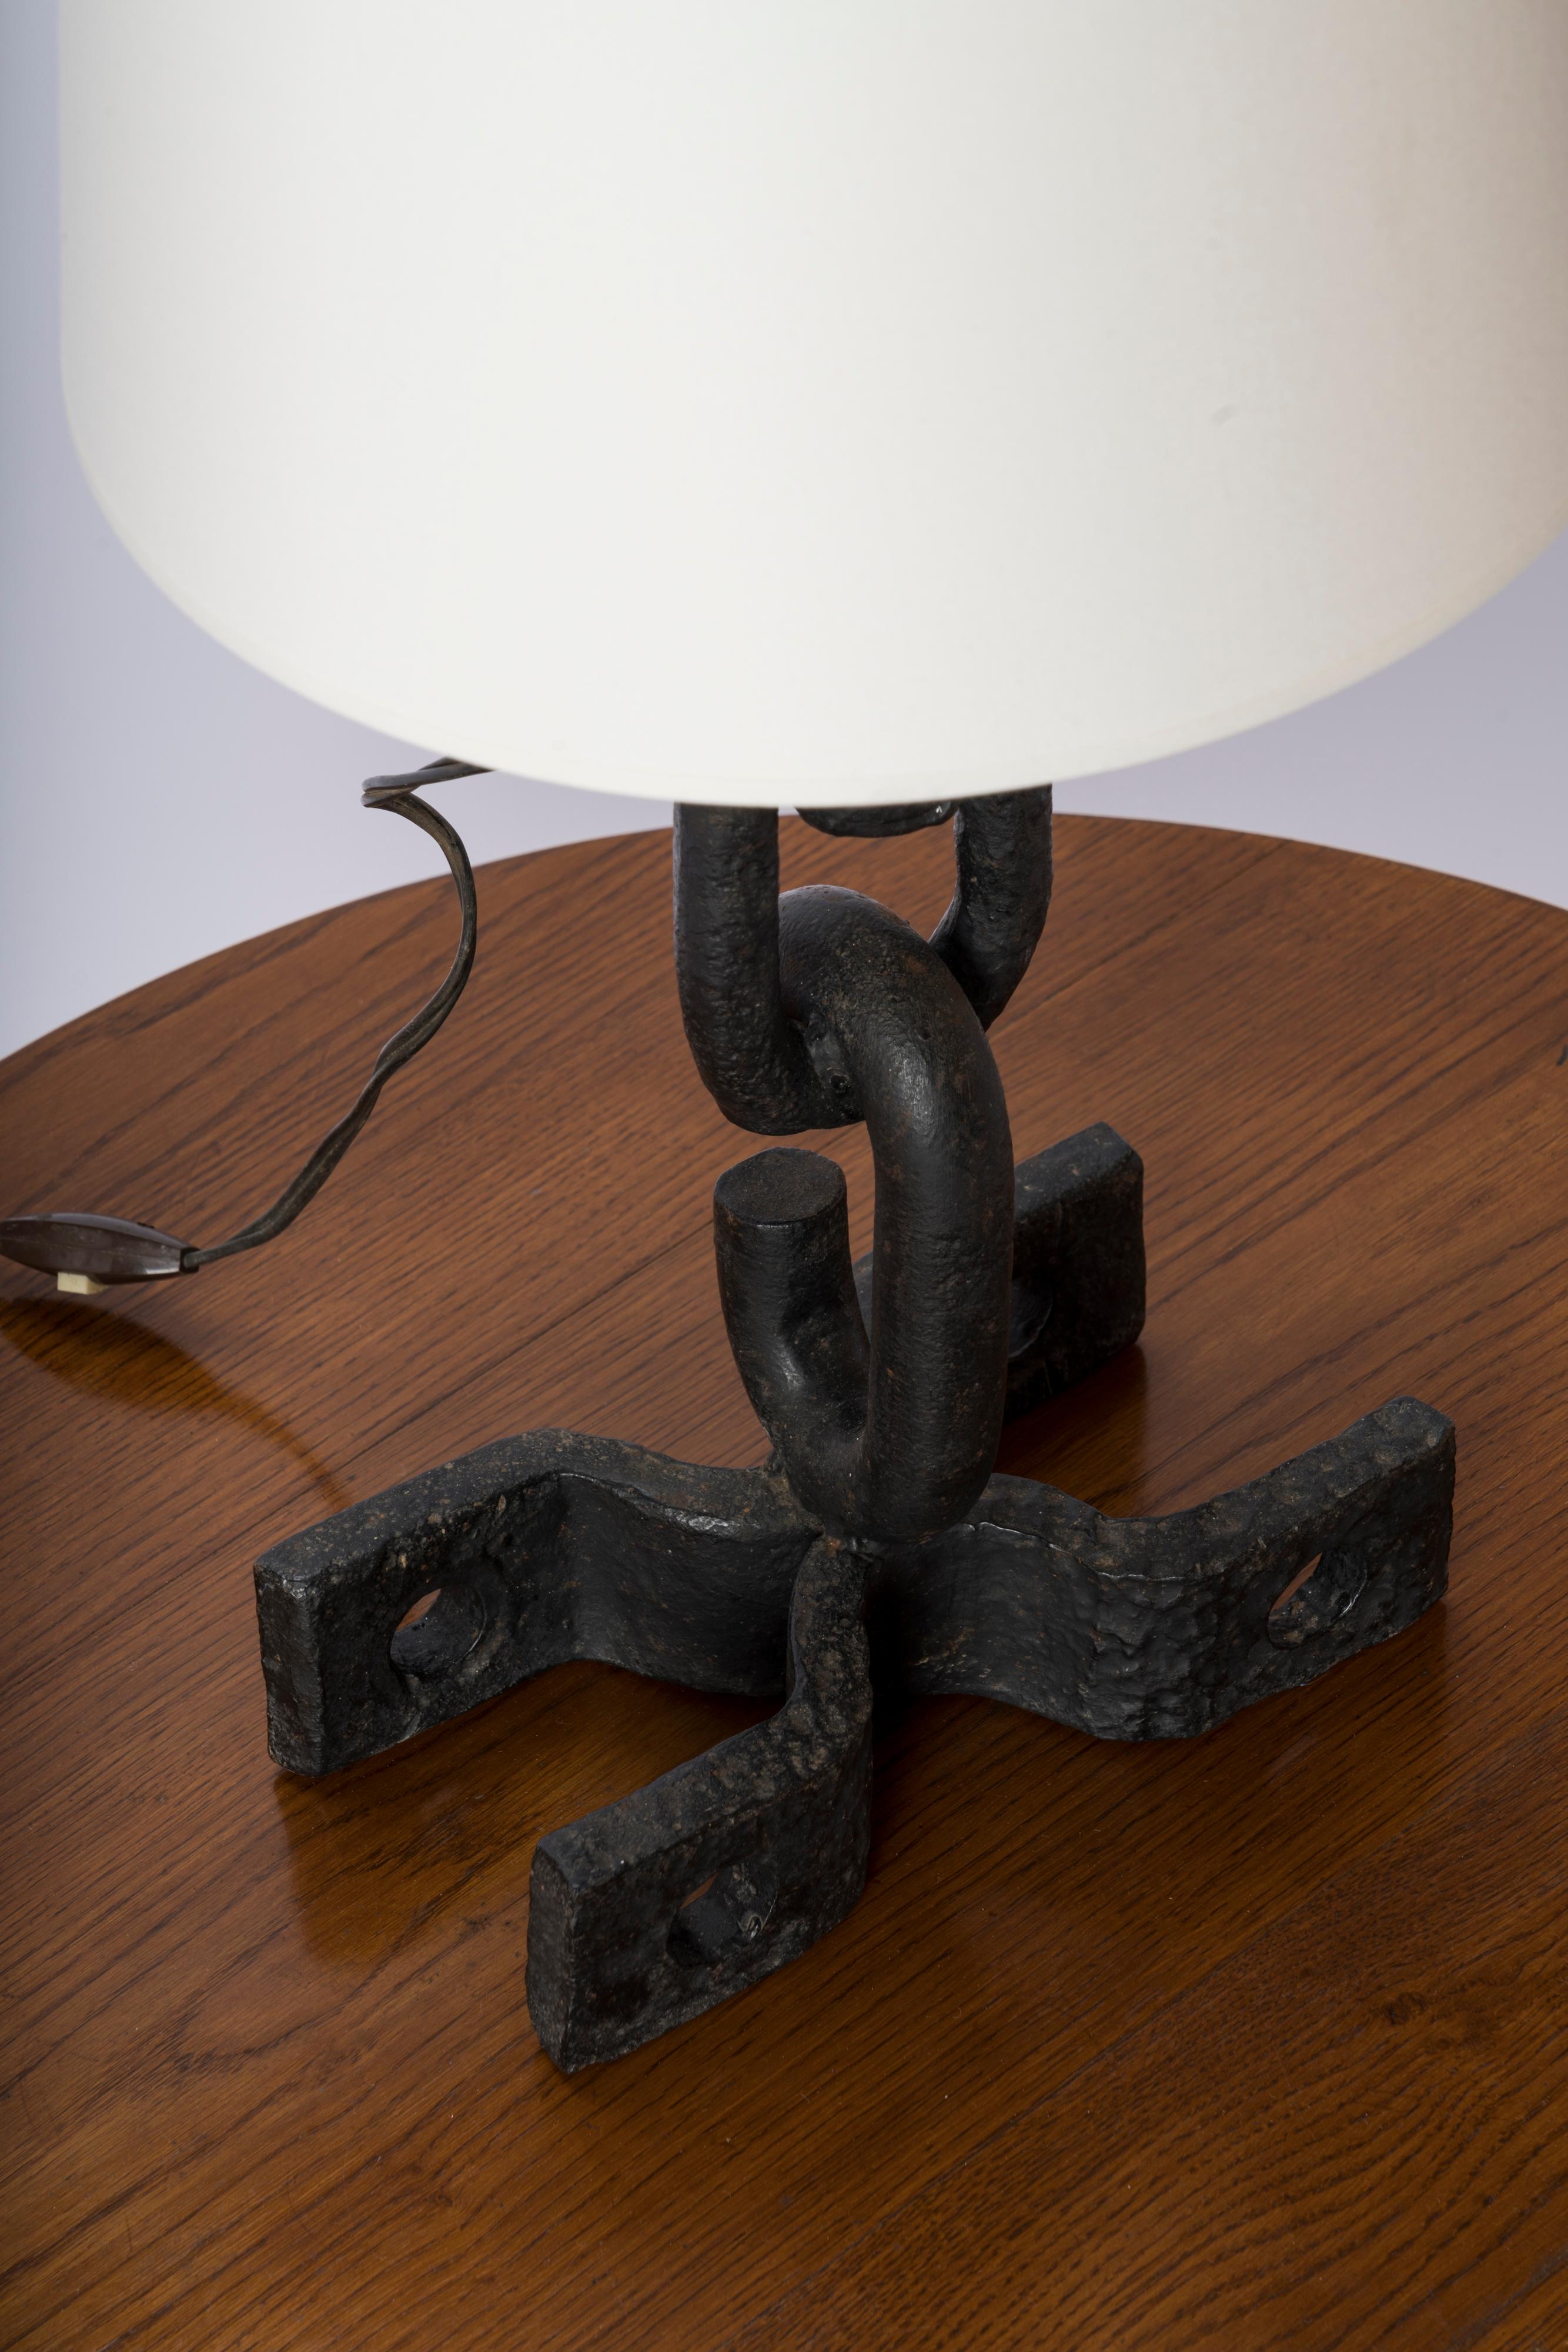 Graphic brutalist table lamp made of welded solid iron fittings. Very heavy. European socket and wiring. This lamp will ship from France and can be returned to either France or to a LIC NY location. Price does not include shipping nor possible